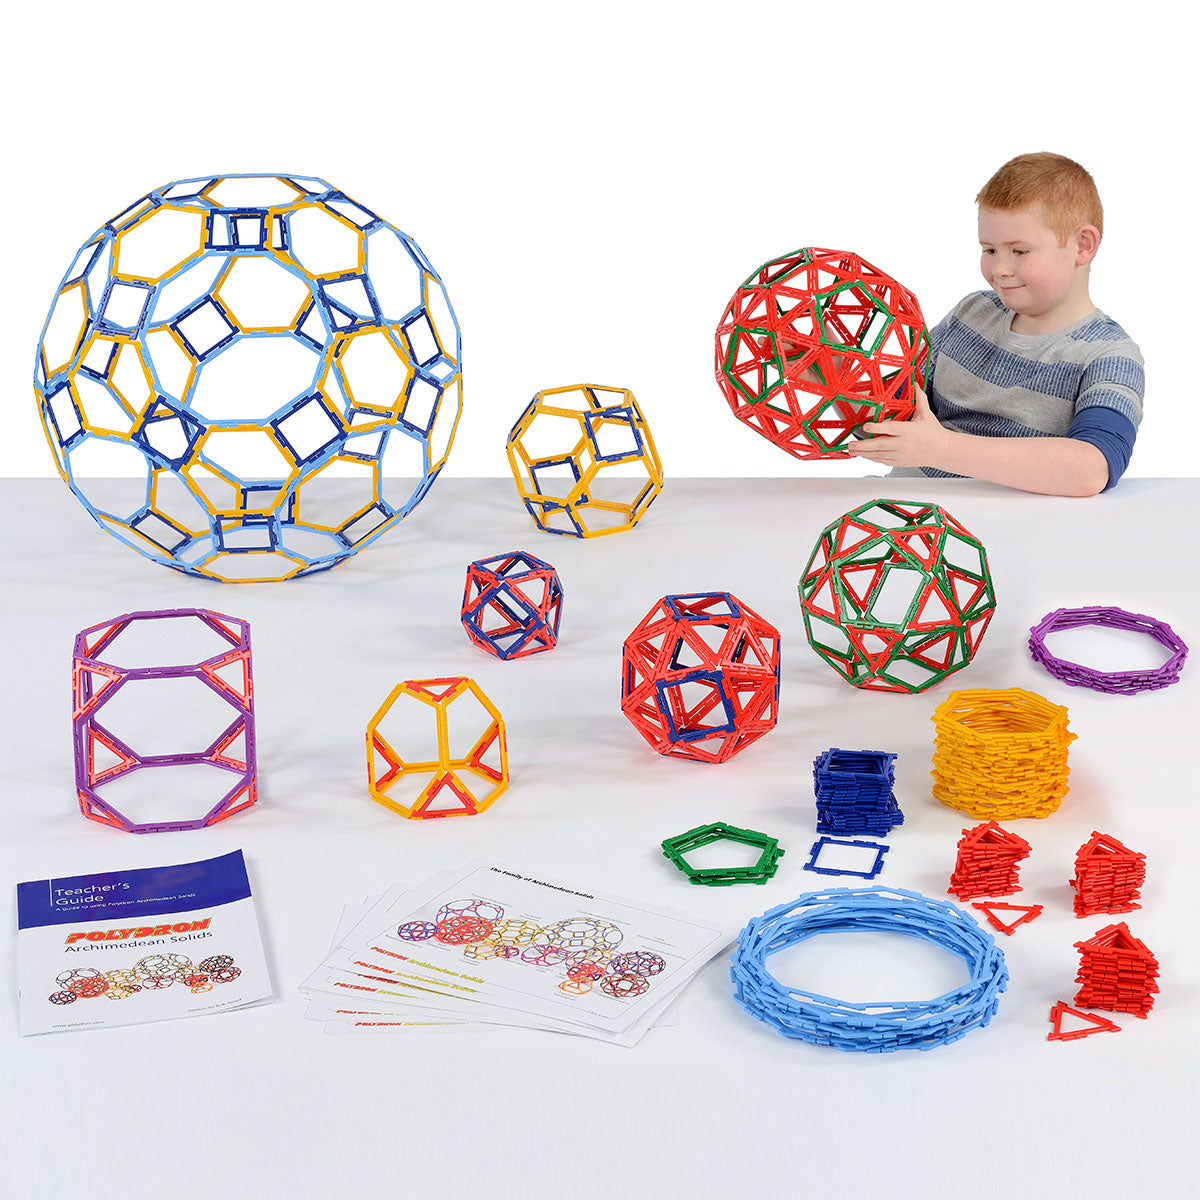 Polydron Frameworks Archimedean Solids Class Set, The Polydron Frameworks Archimedean Solids Class Set is the perfect tool for students to build and explore the fascinating world of Archimedean solids. These unique geometric shapes have captivated mathematicians for over 2000 years, and now children can delve into their properties all at once with this comprehensive set.With a total of 452 pieces, the set includes 108 squares, 200 equilateral triangles, 48 pentagons, 60 hexagons, 12 octagons, 24 decagons, a